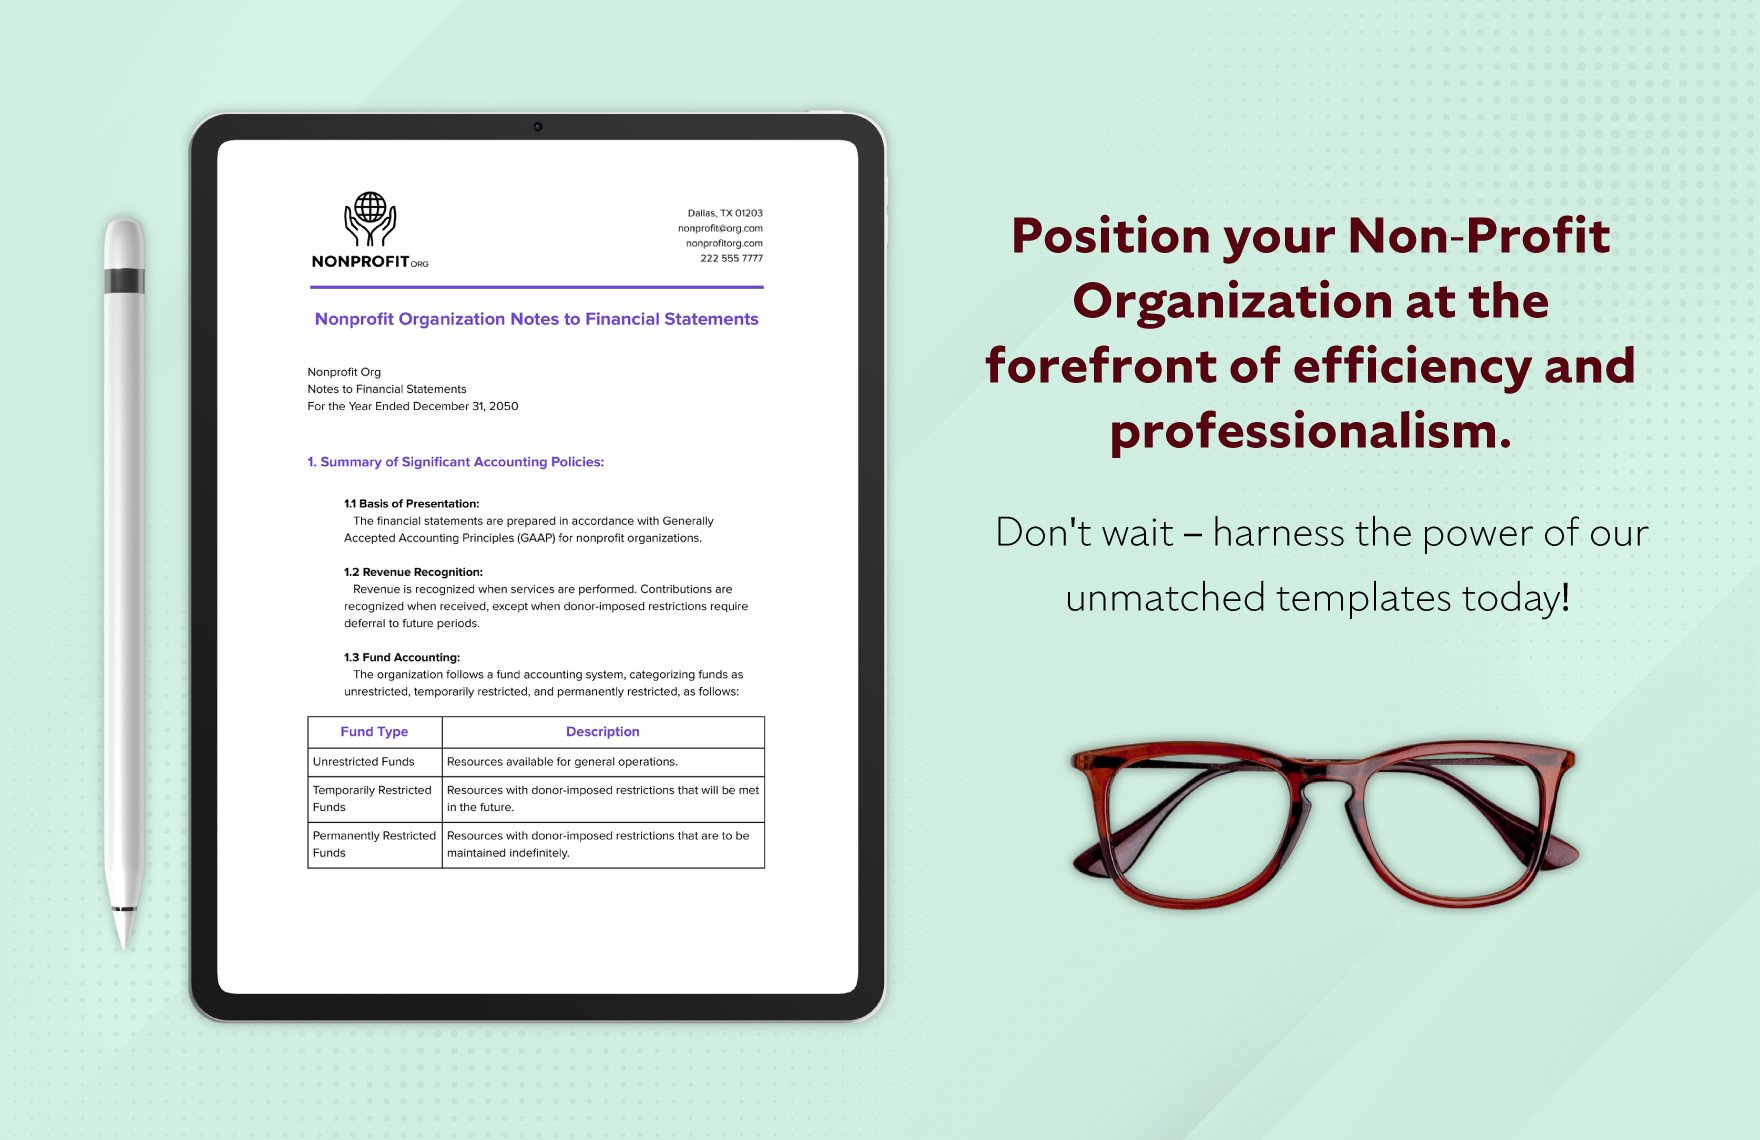 Nonprofit Organization Notes to Financial Statements Template